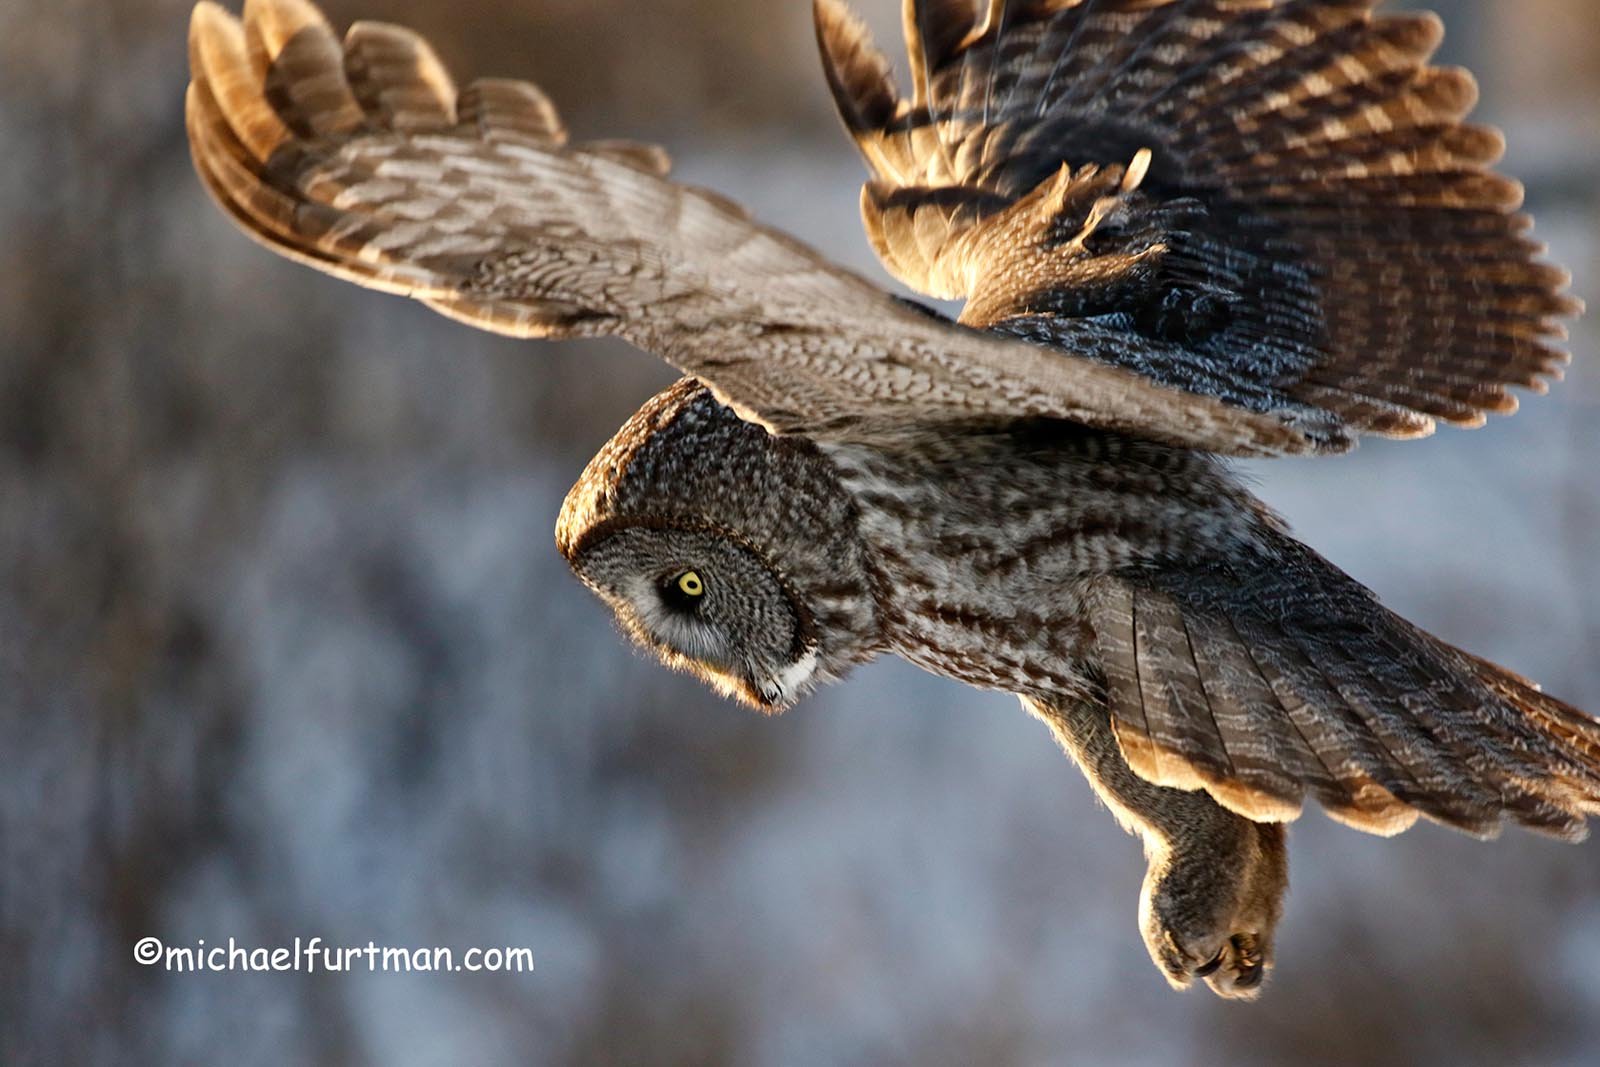 The Foul Practice of Wild Owl Baiting by 'Wildlife Photographers